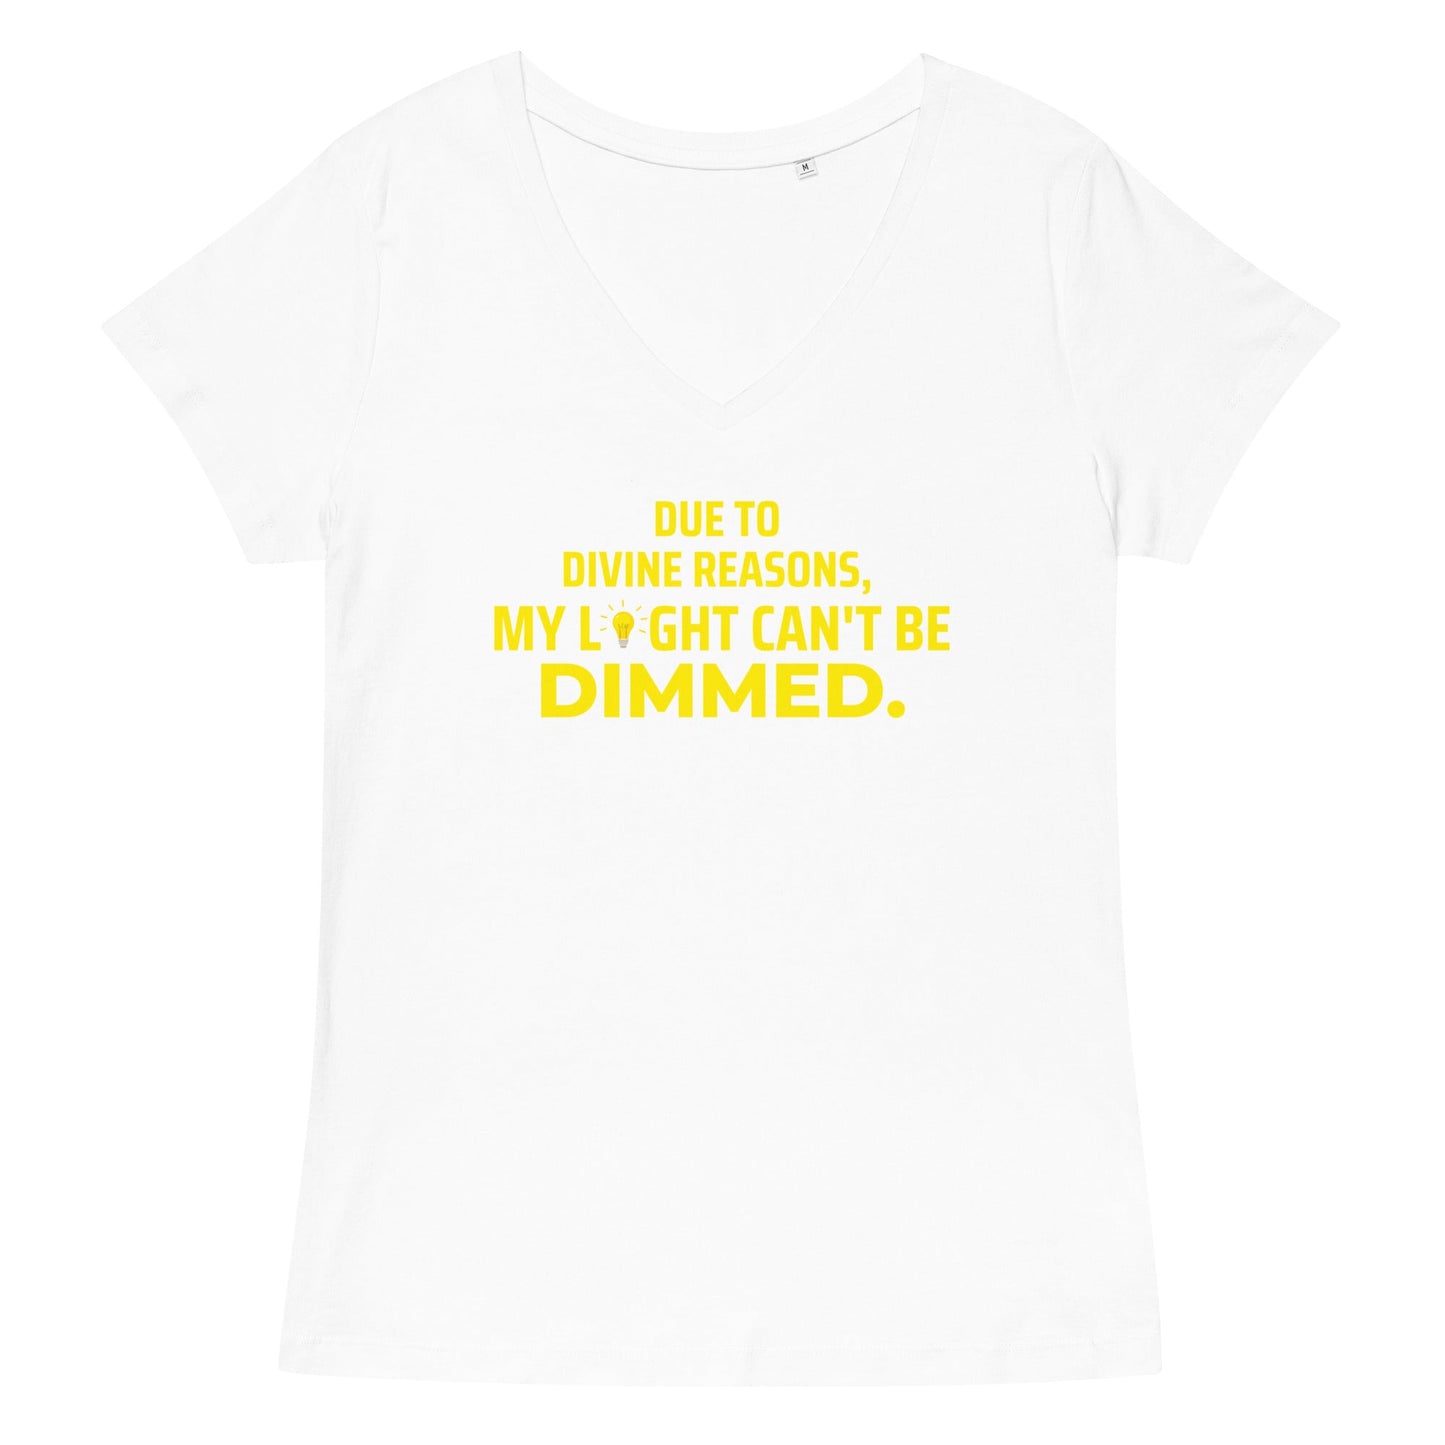 Can't Be Dimmed Women’s Fitted V-neck T-shirt - Catch This Tea Shirts